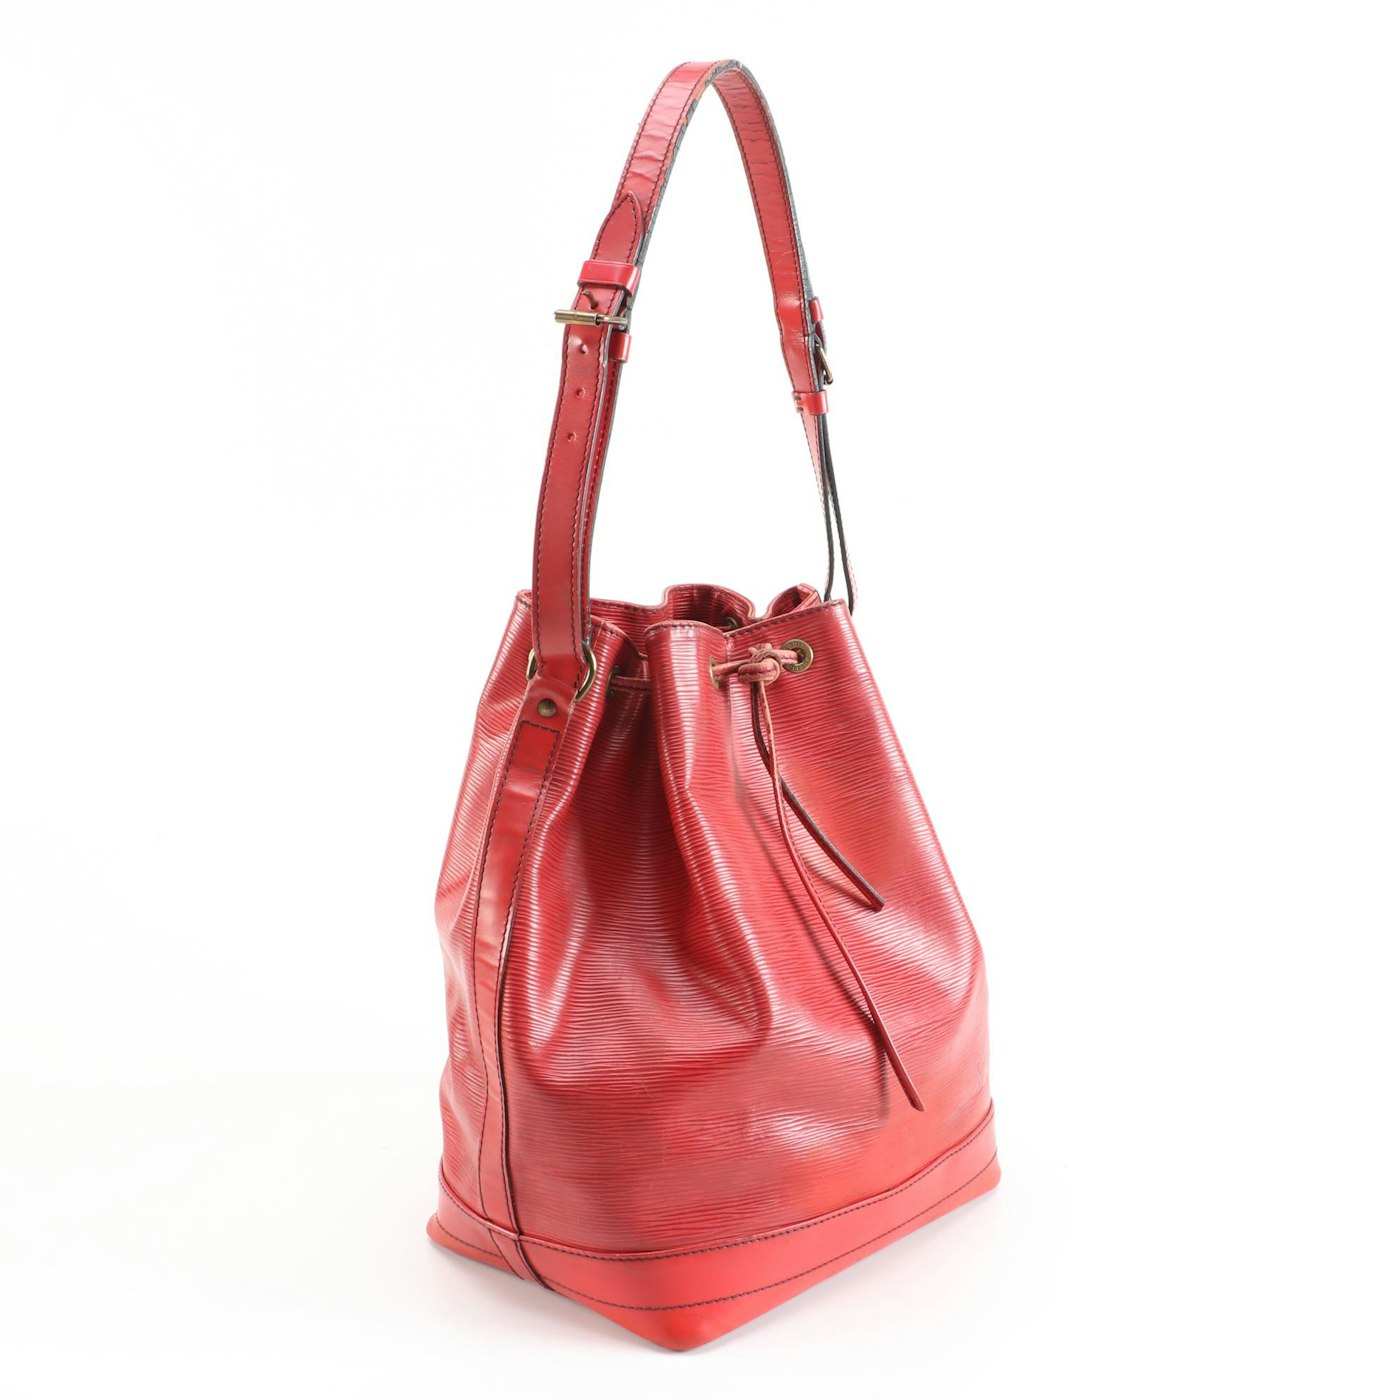 Refurbished Louis Vuitton Noé Bucket Bag in Red Epi Leather | EBTH